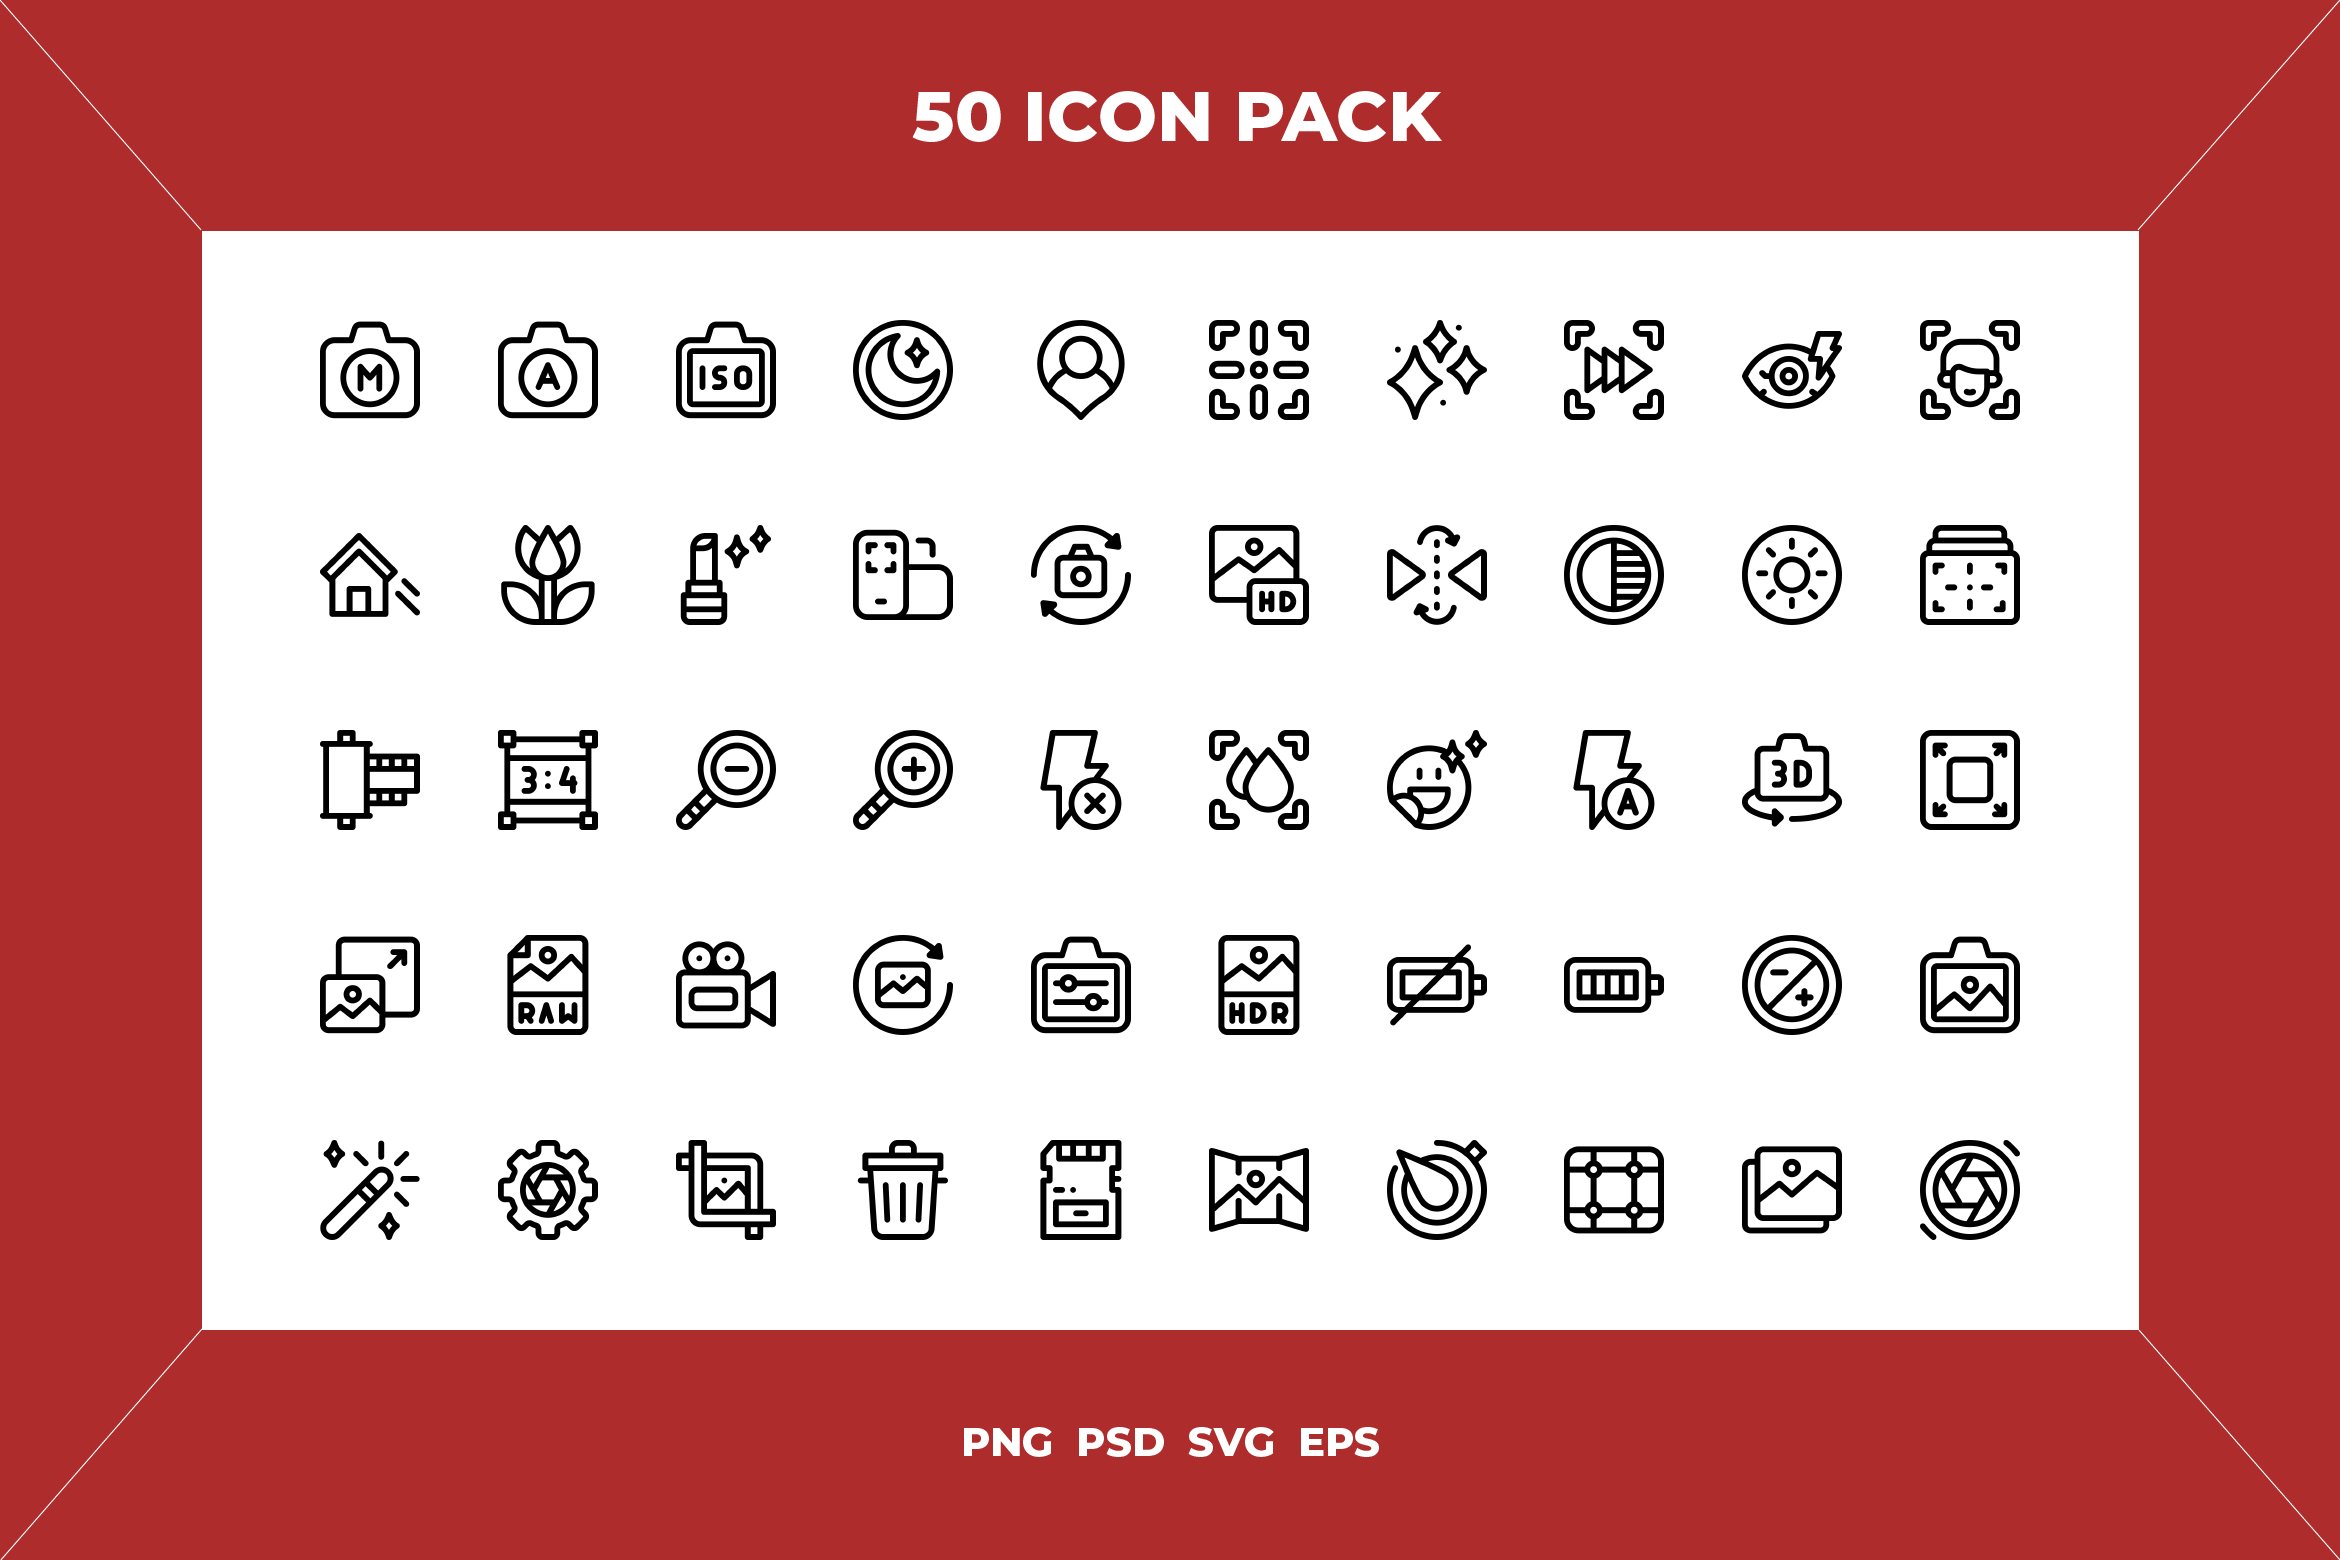 Camera interface icons cover image.